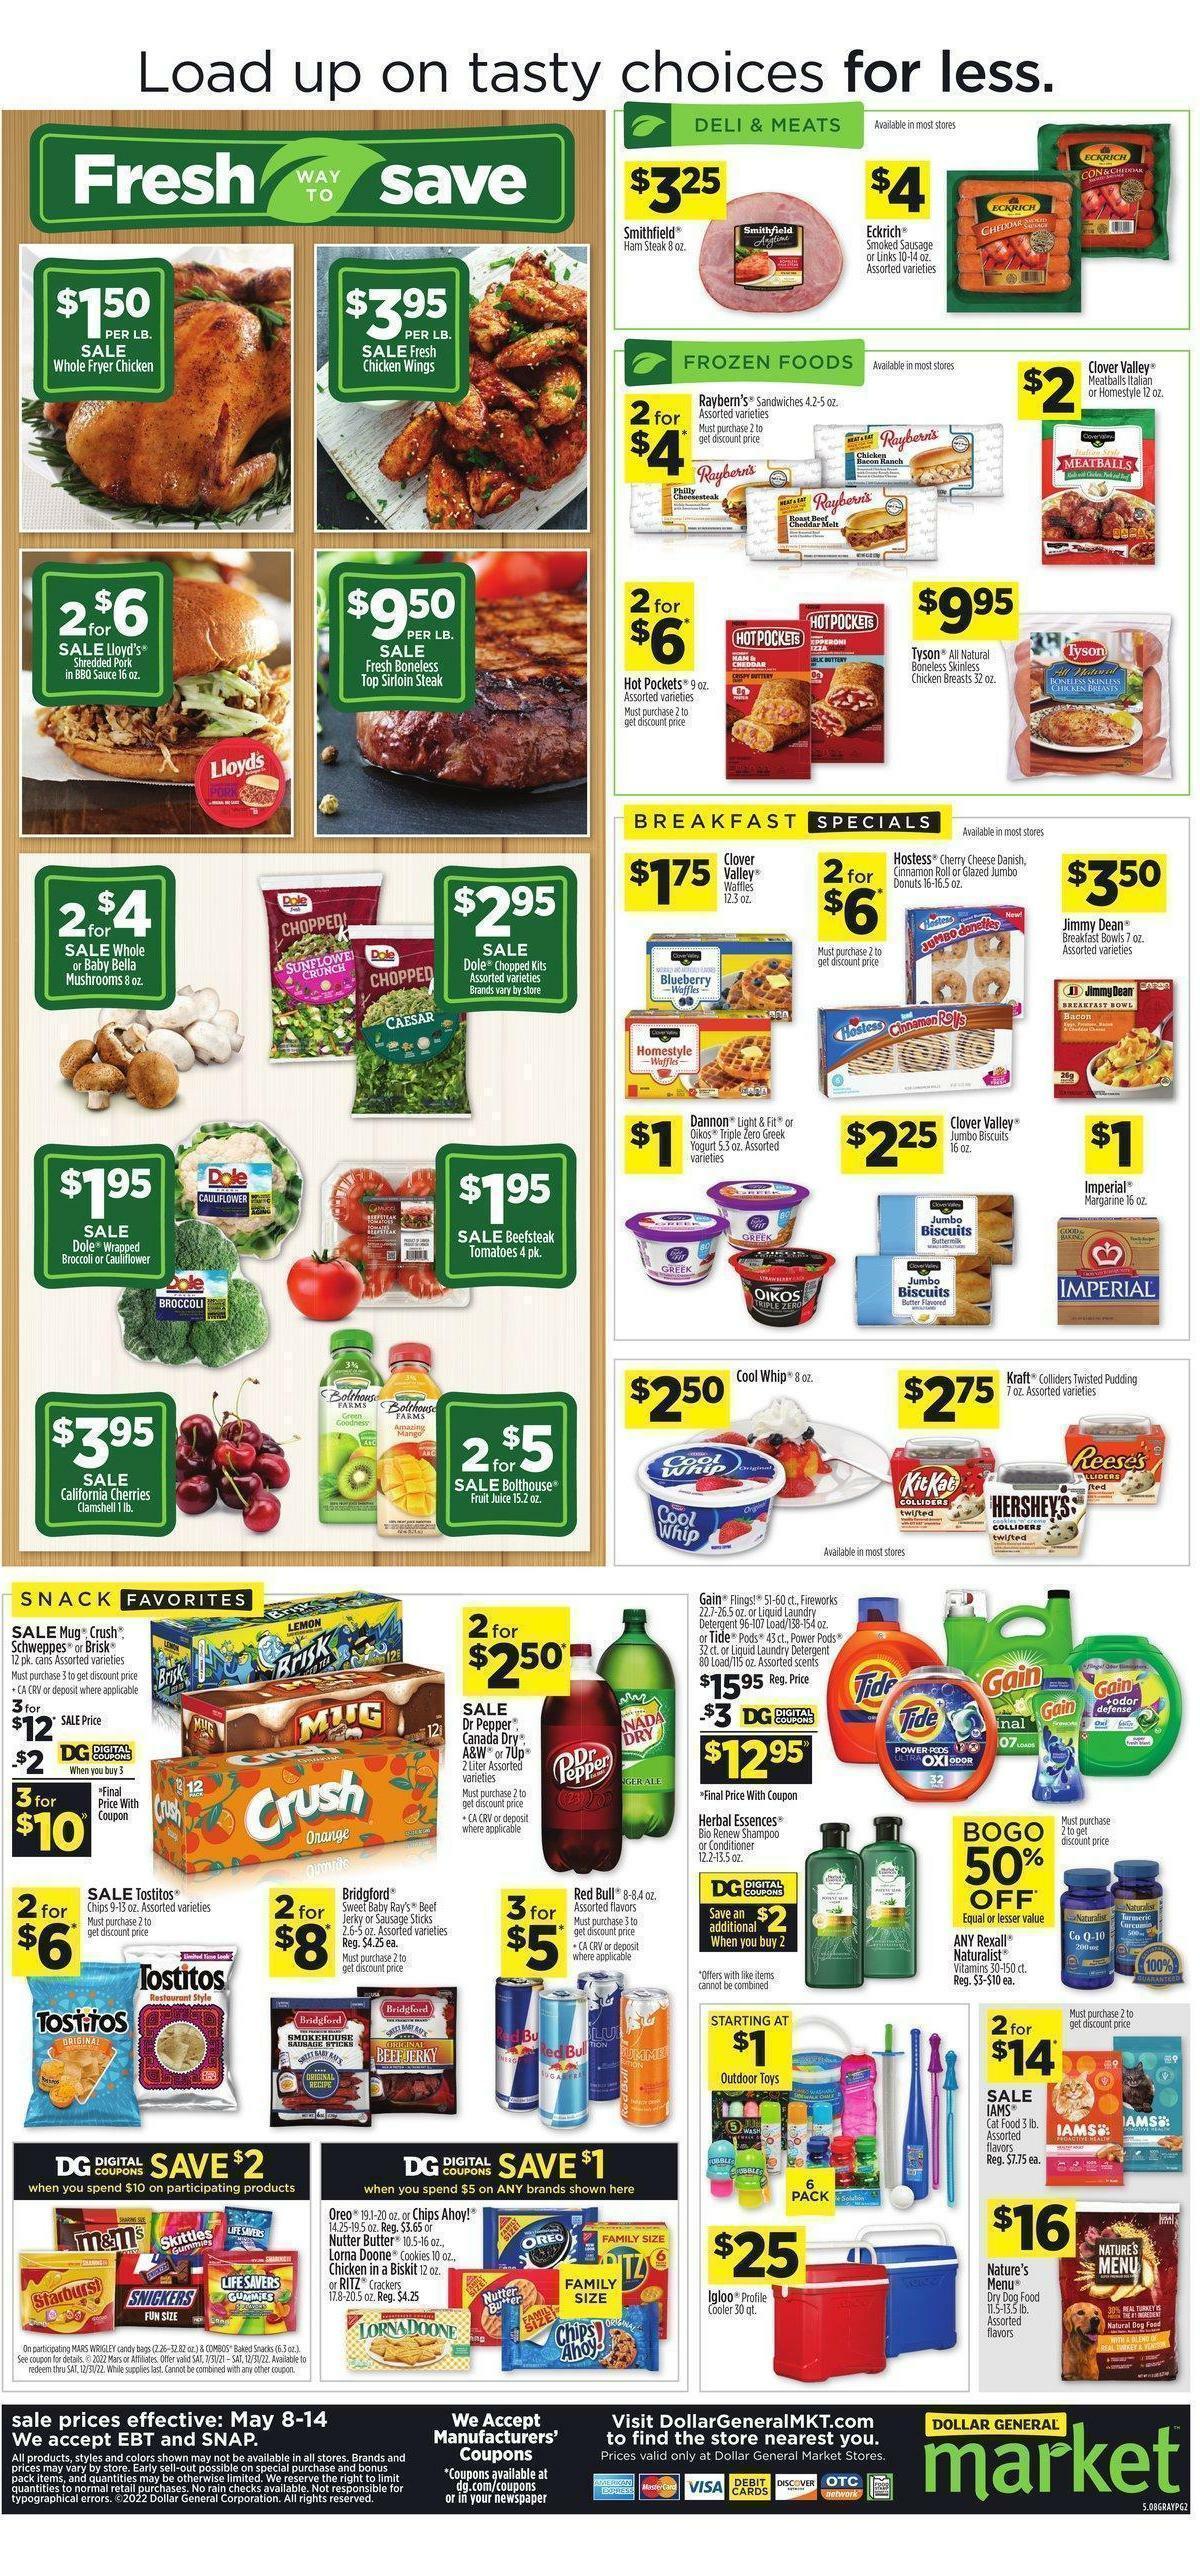 Dollar General Market Ad Weekly Ad from May 8